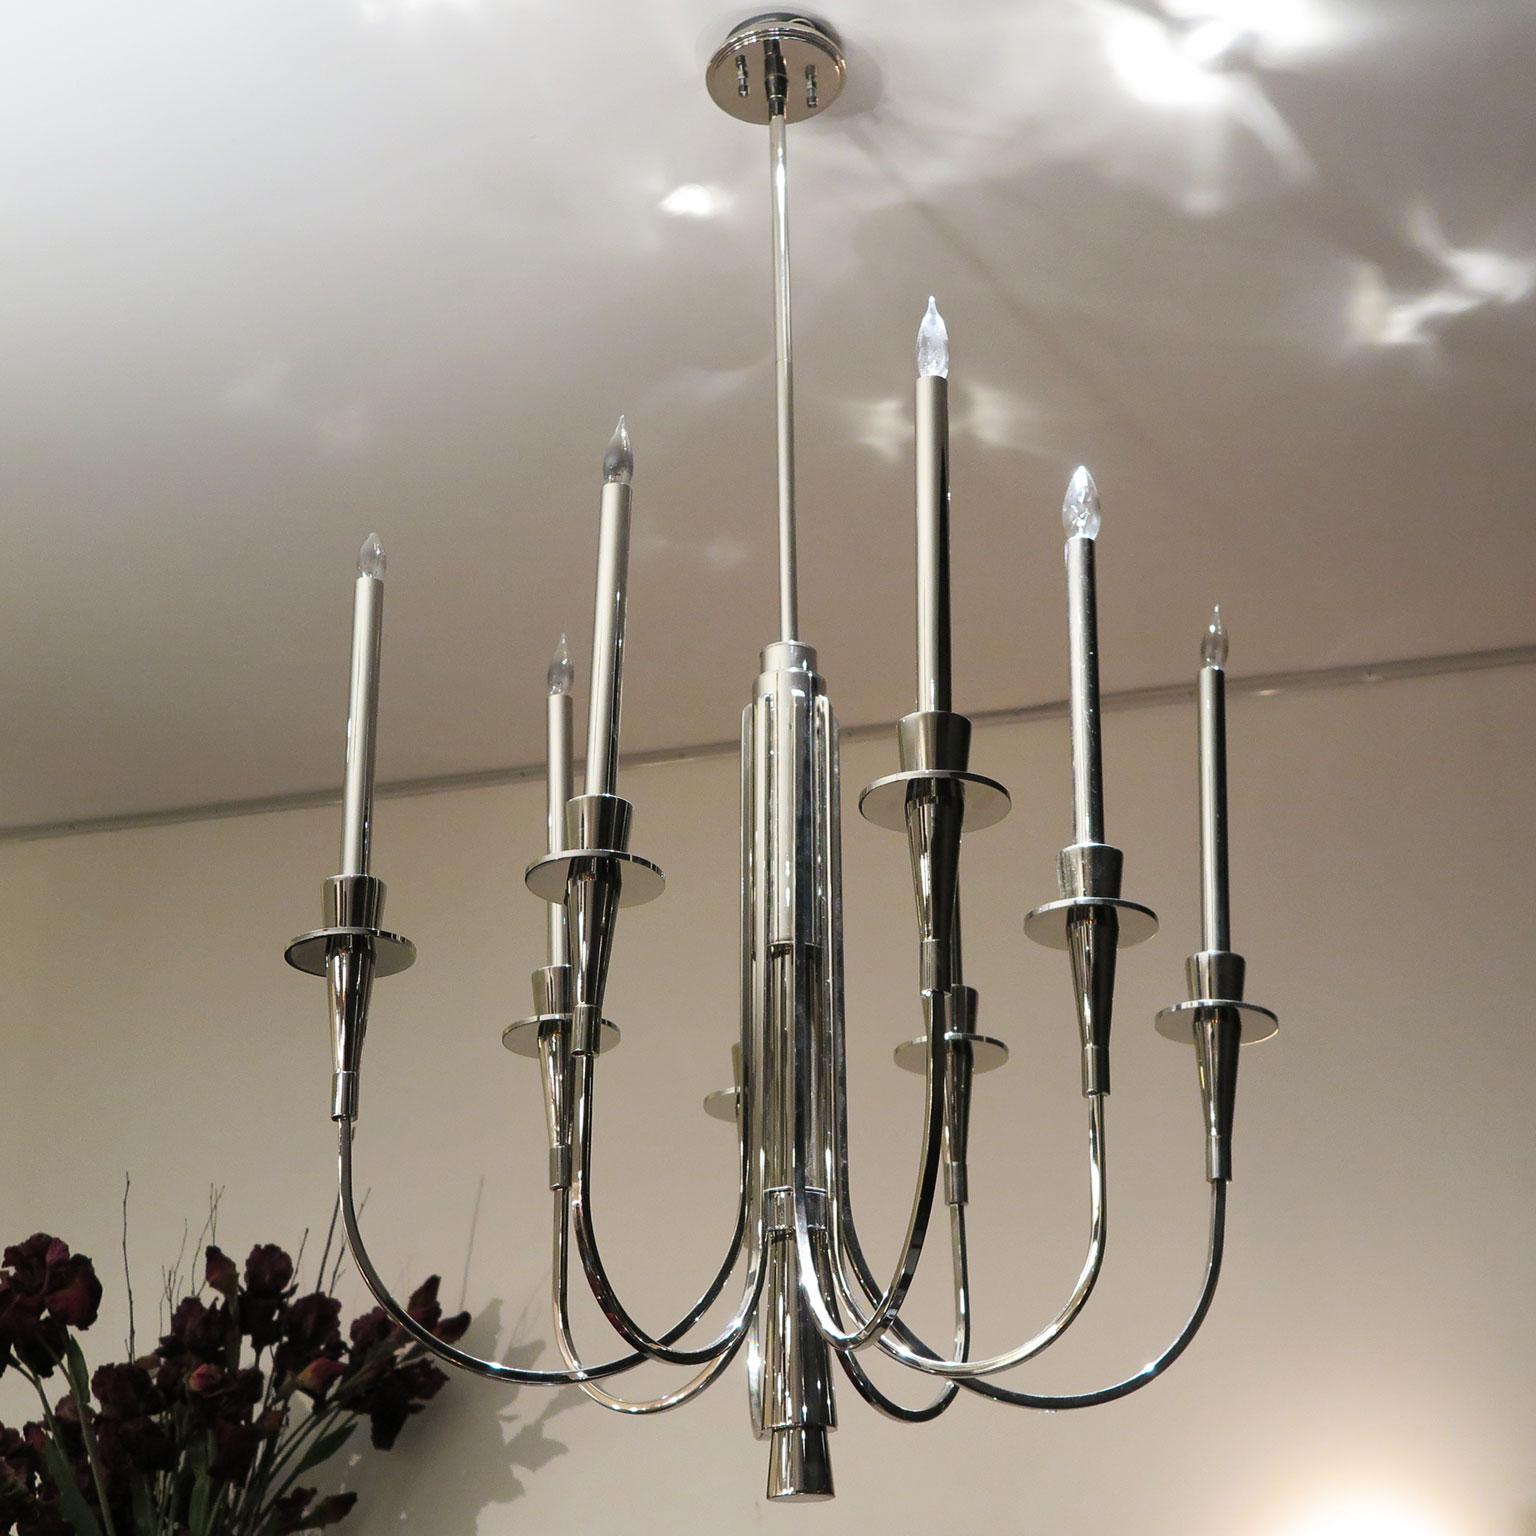 Mid-Century Modern 8-arm chandelier with candelabra style arms and exposed bulbs. Beautifully done in polished nickel. Art Deco inspired design along the stem. The tall candelabra chandelier is ideal for high-ceilings, but can be shortened upon